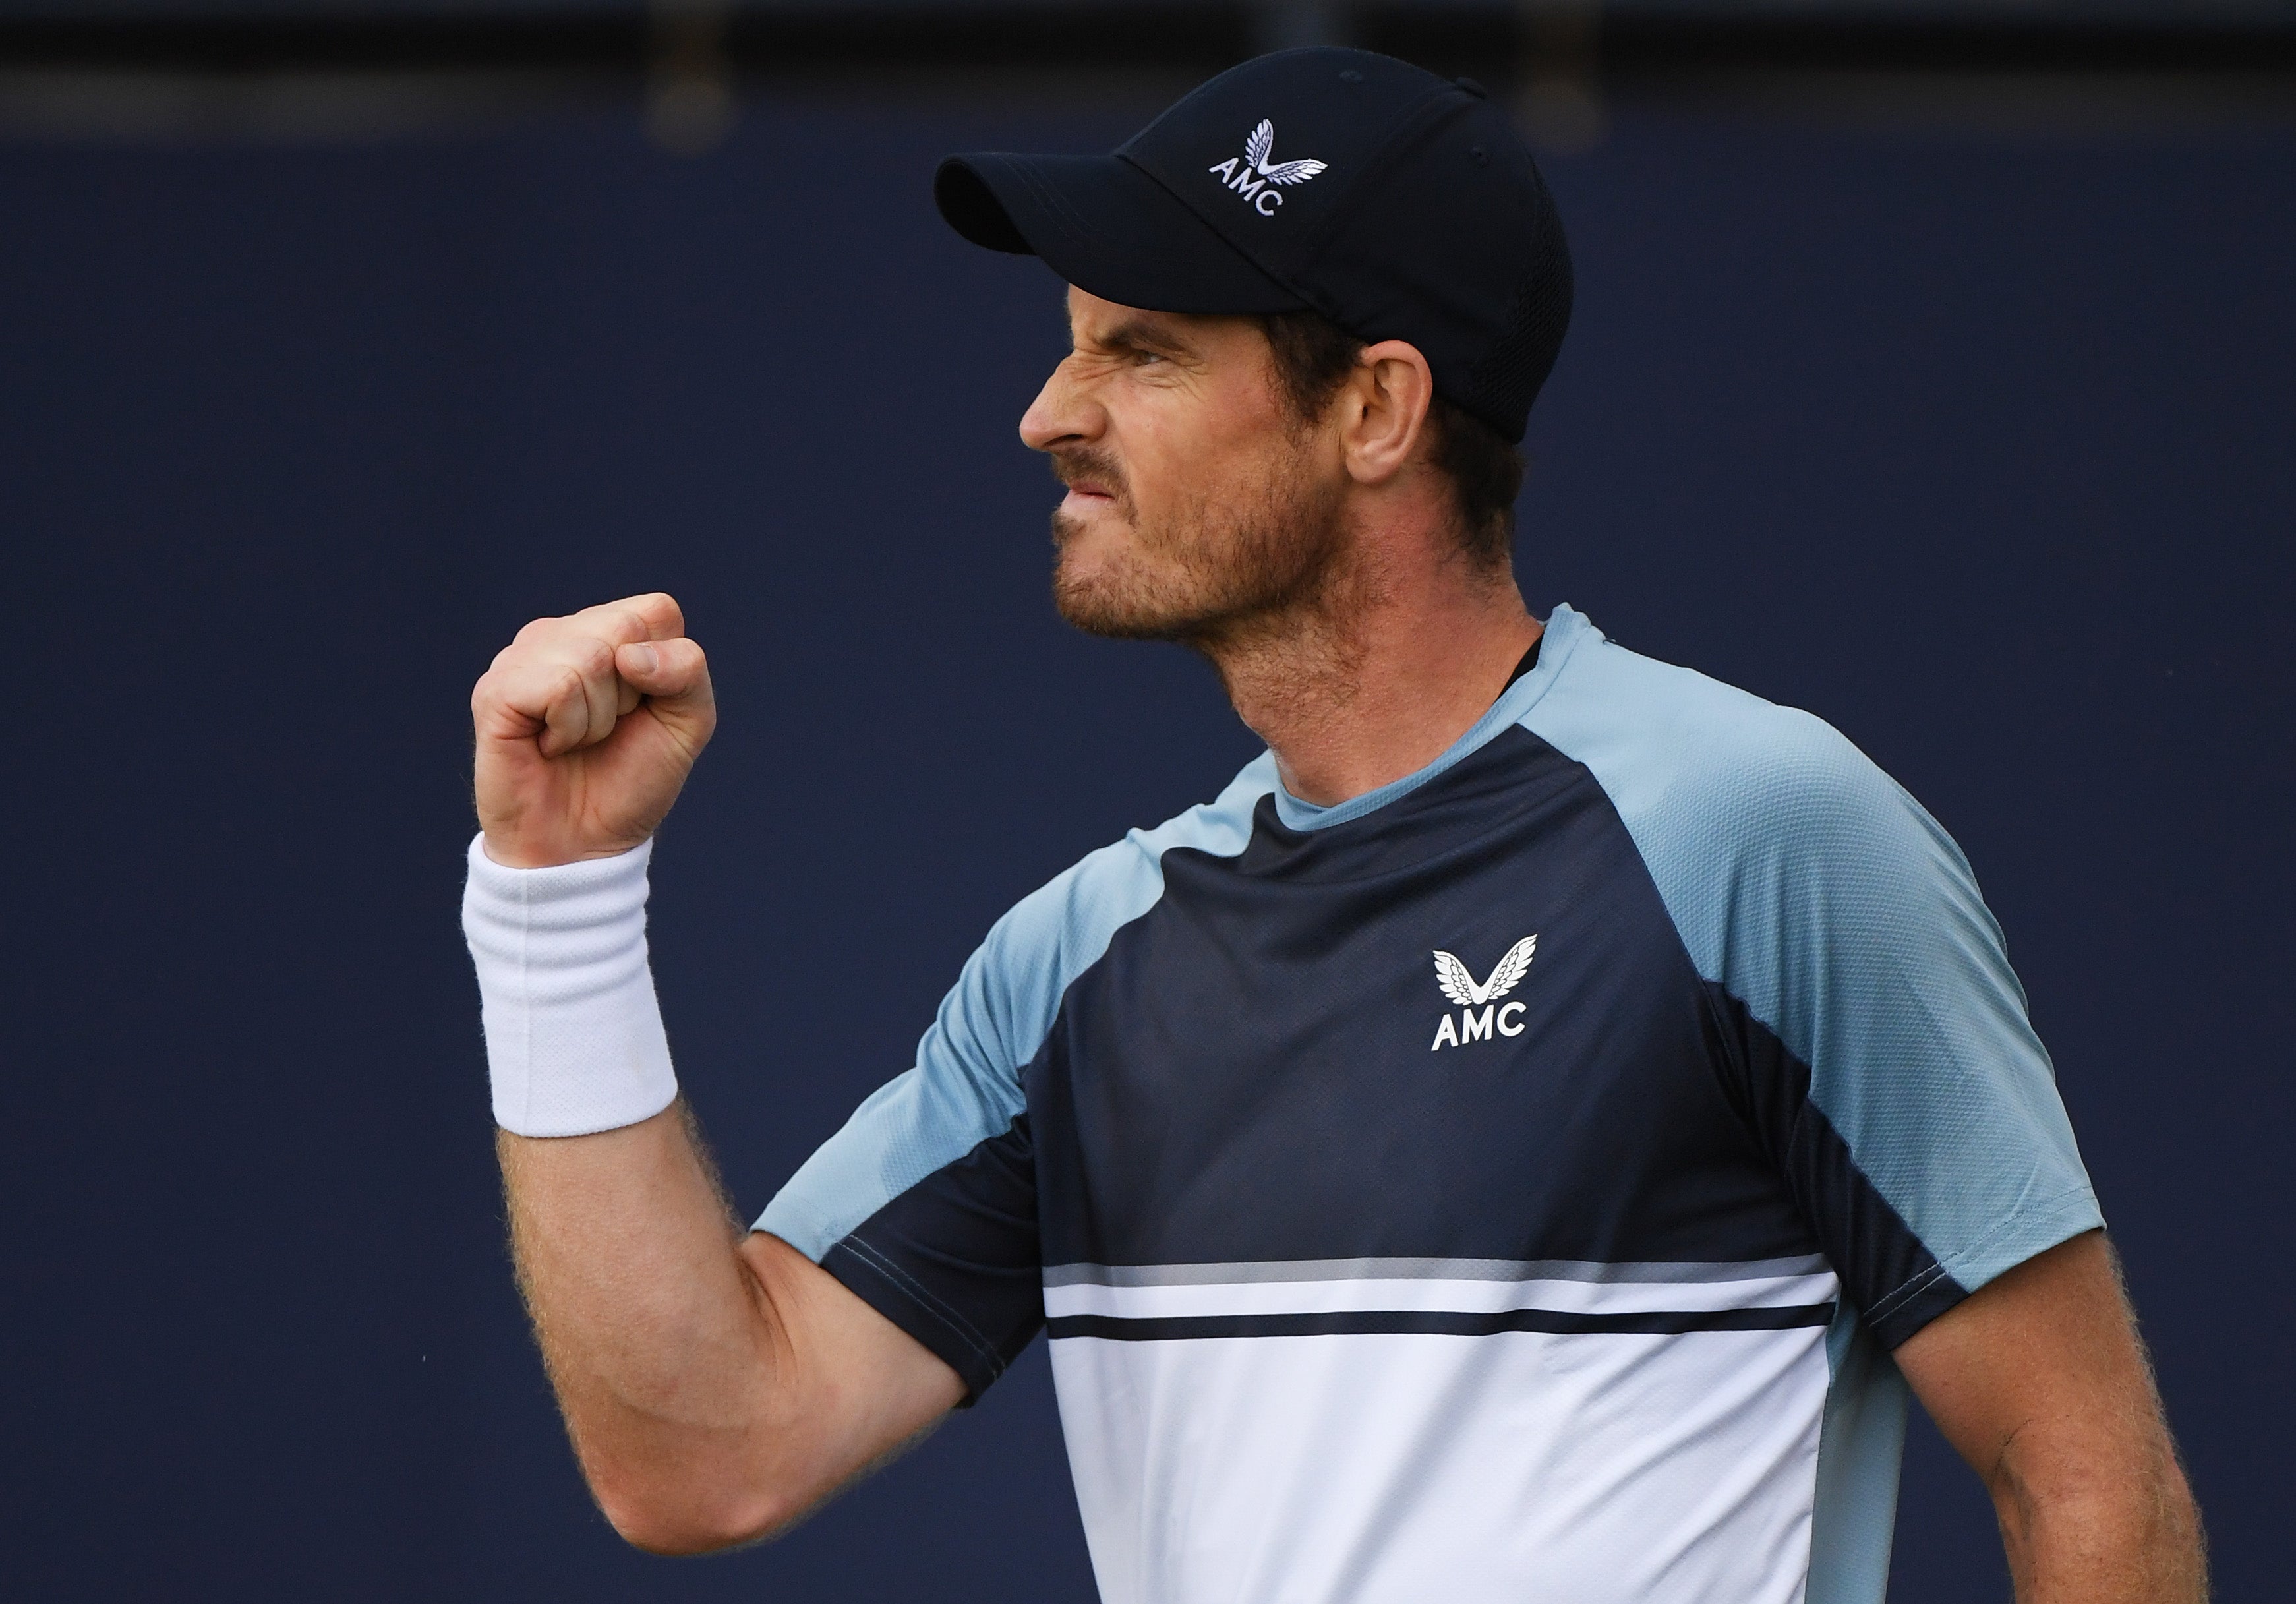 The Surbiton Trophy is set to be one of three tournaments Murray plays in ahead of this year’s Wimbledon